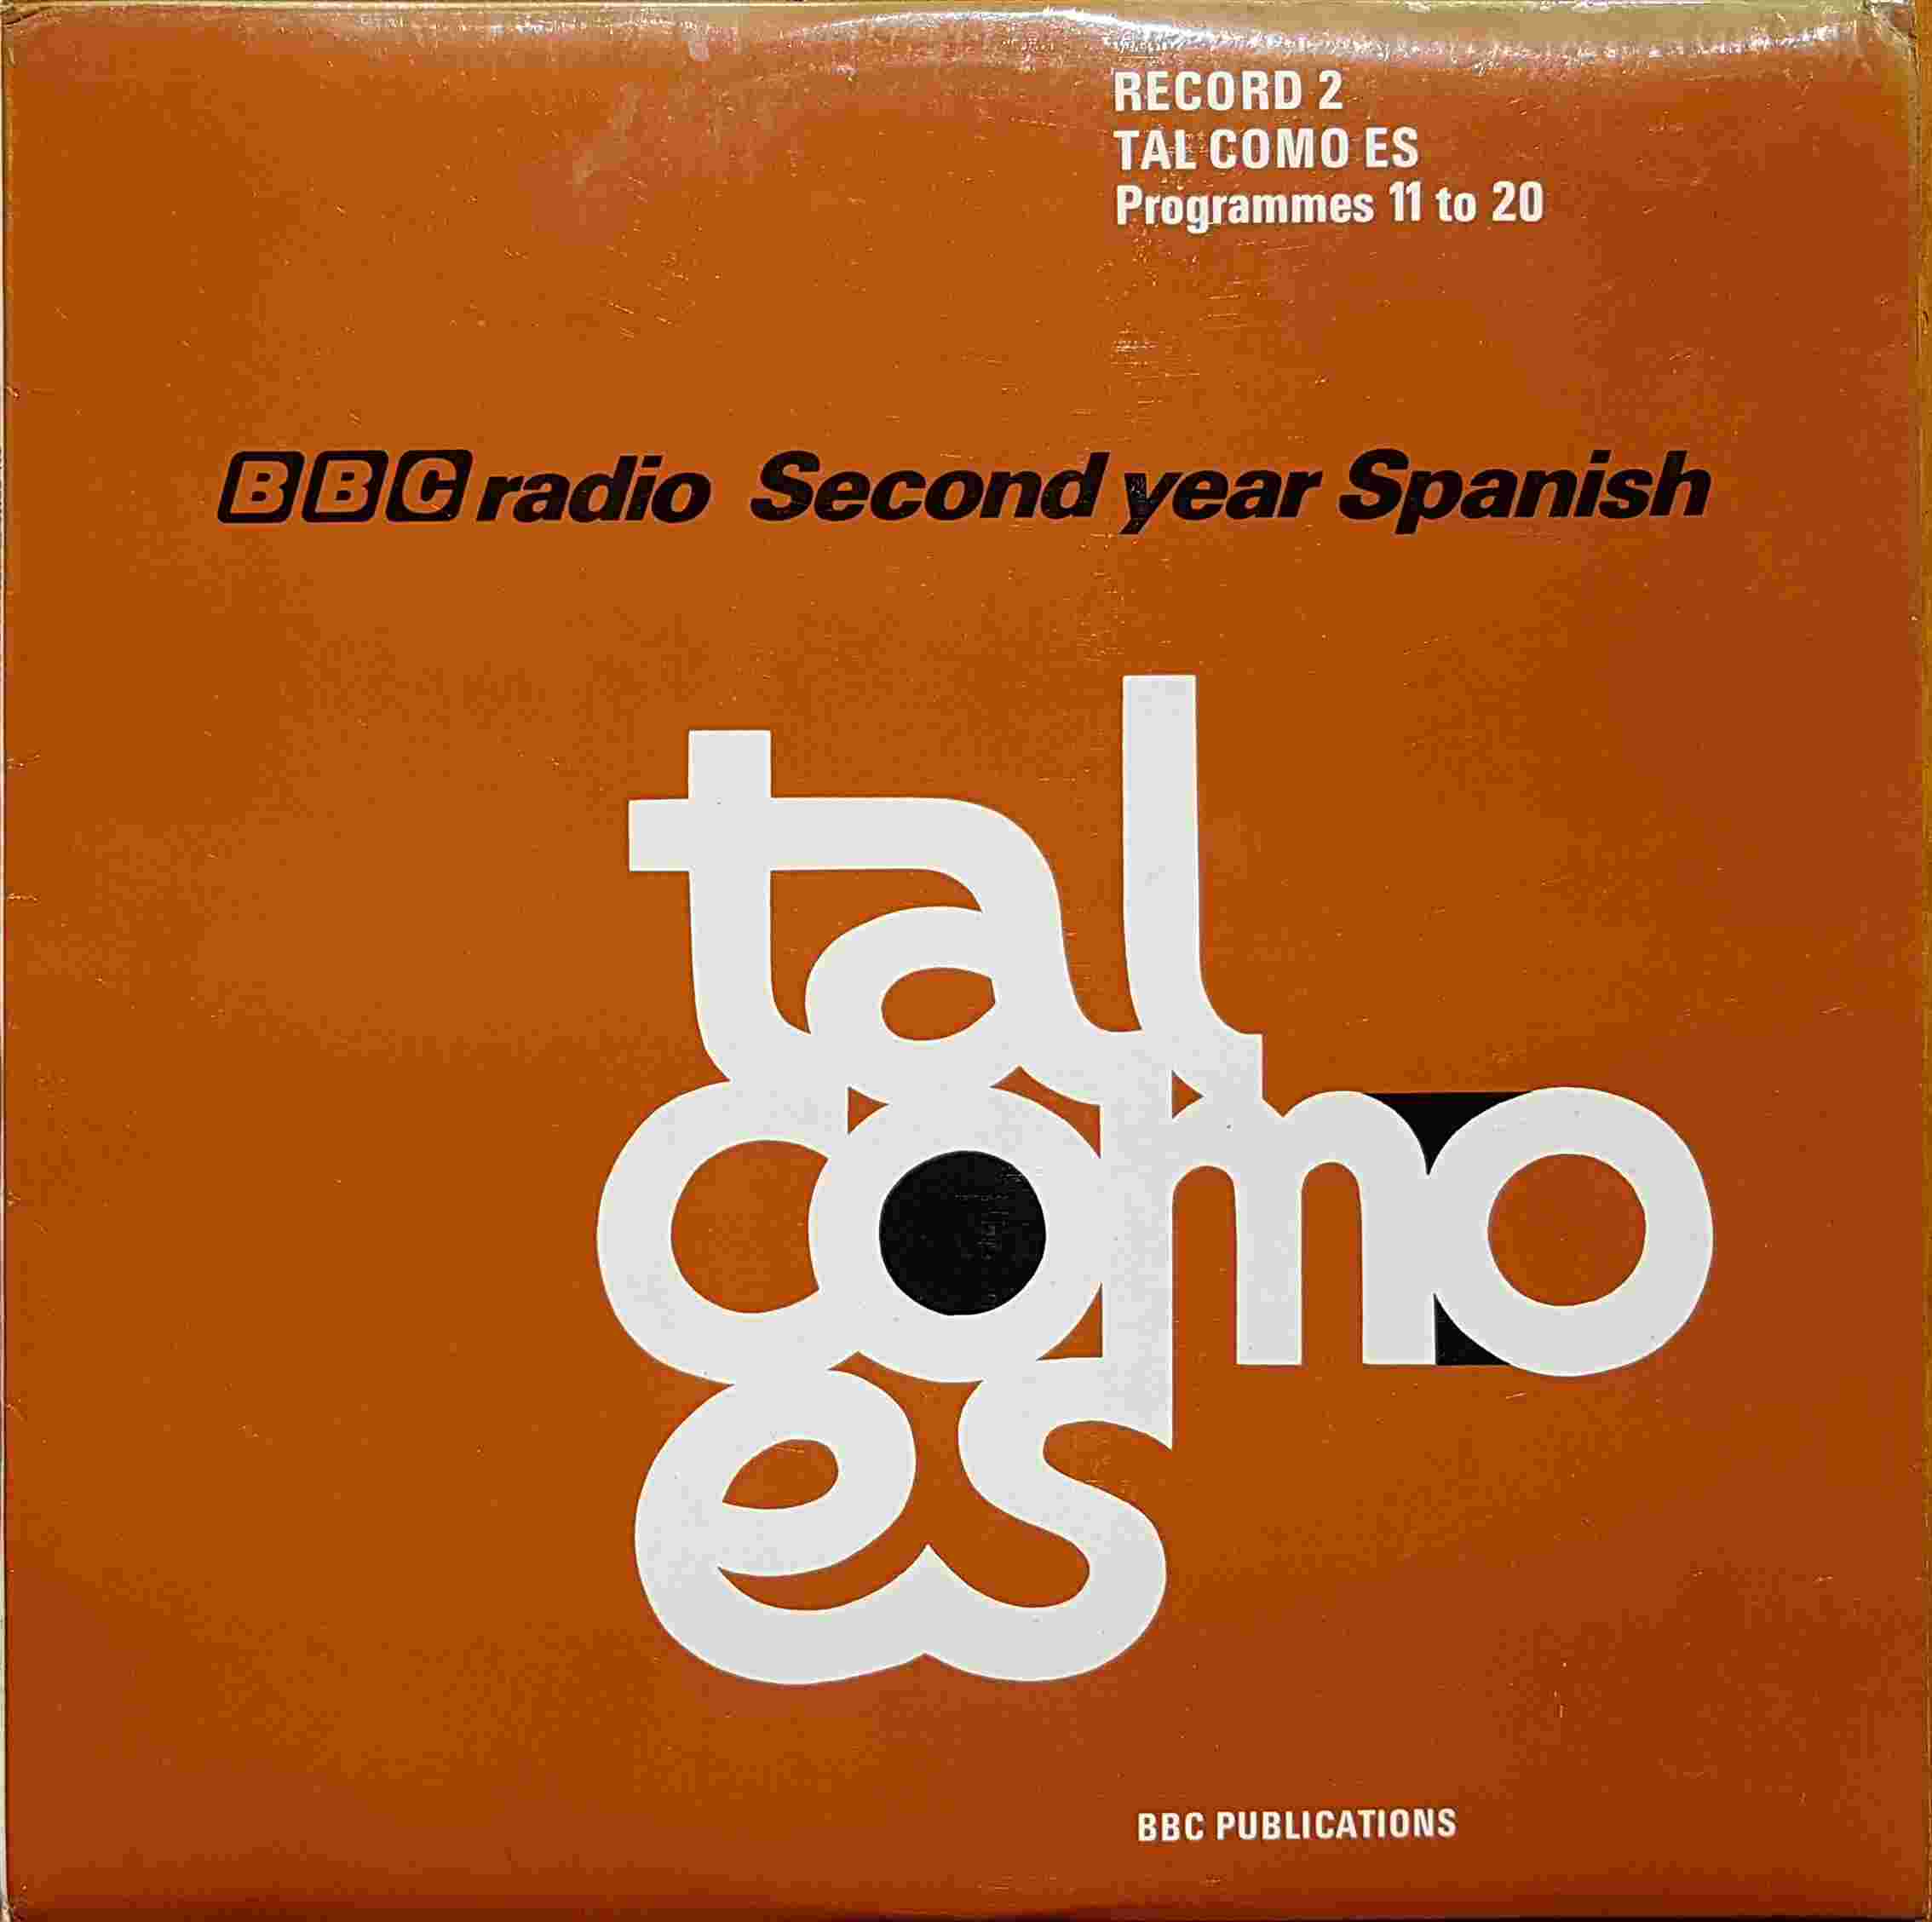 Picture of OP 183/184 Tal como es - BBC radio Second year Spanish - Record 2 - Programmes 11 - 20 by artist Carmen Ruiz / Pepe Machado from the BBC albums - Records and Tapes library